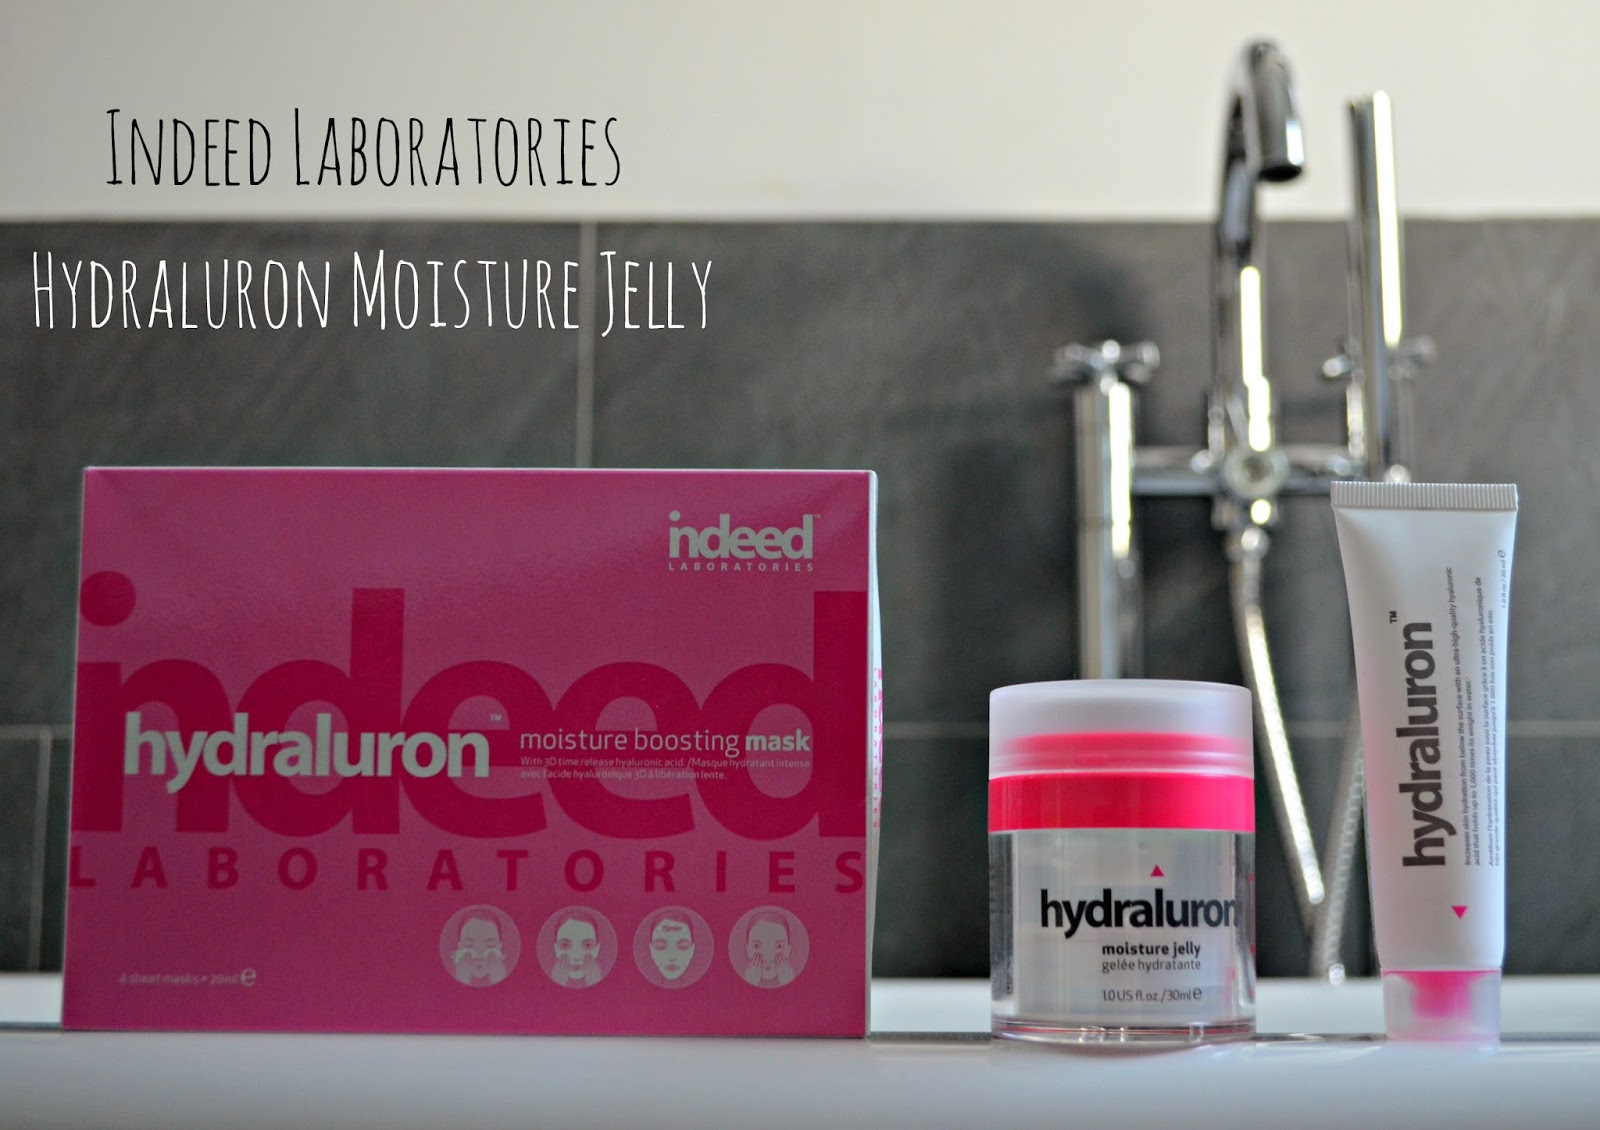 Indeed Laboratories hydraluron moisture jelly review